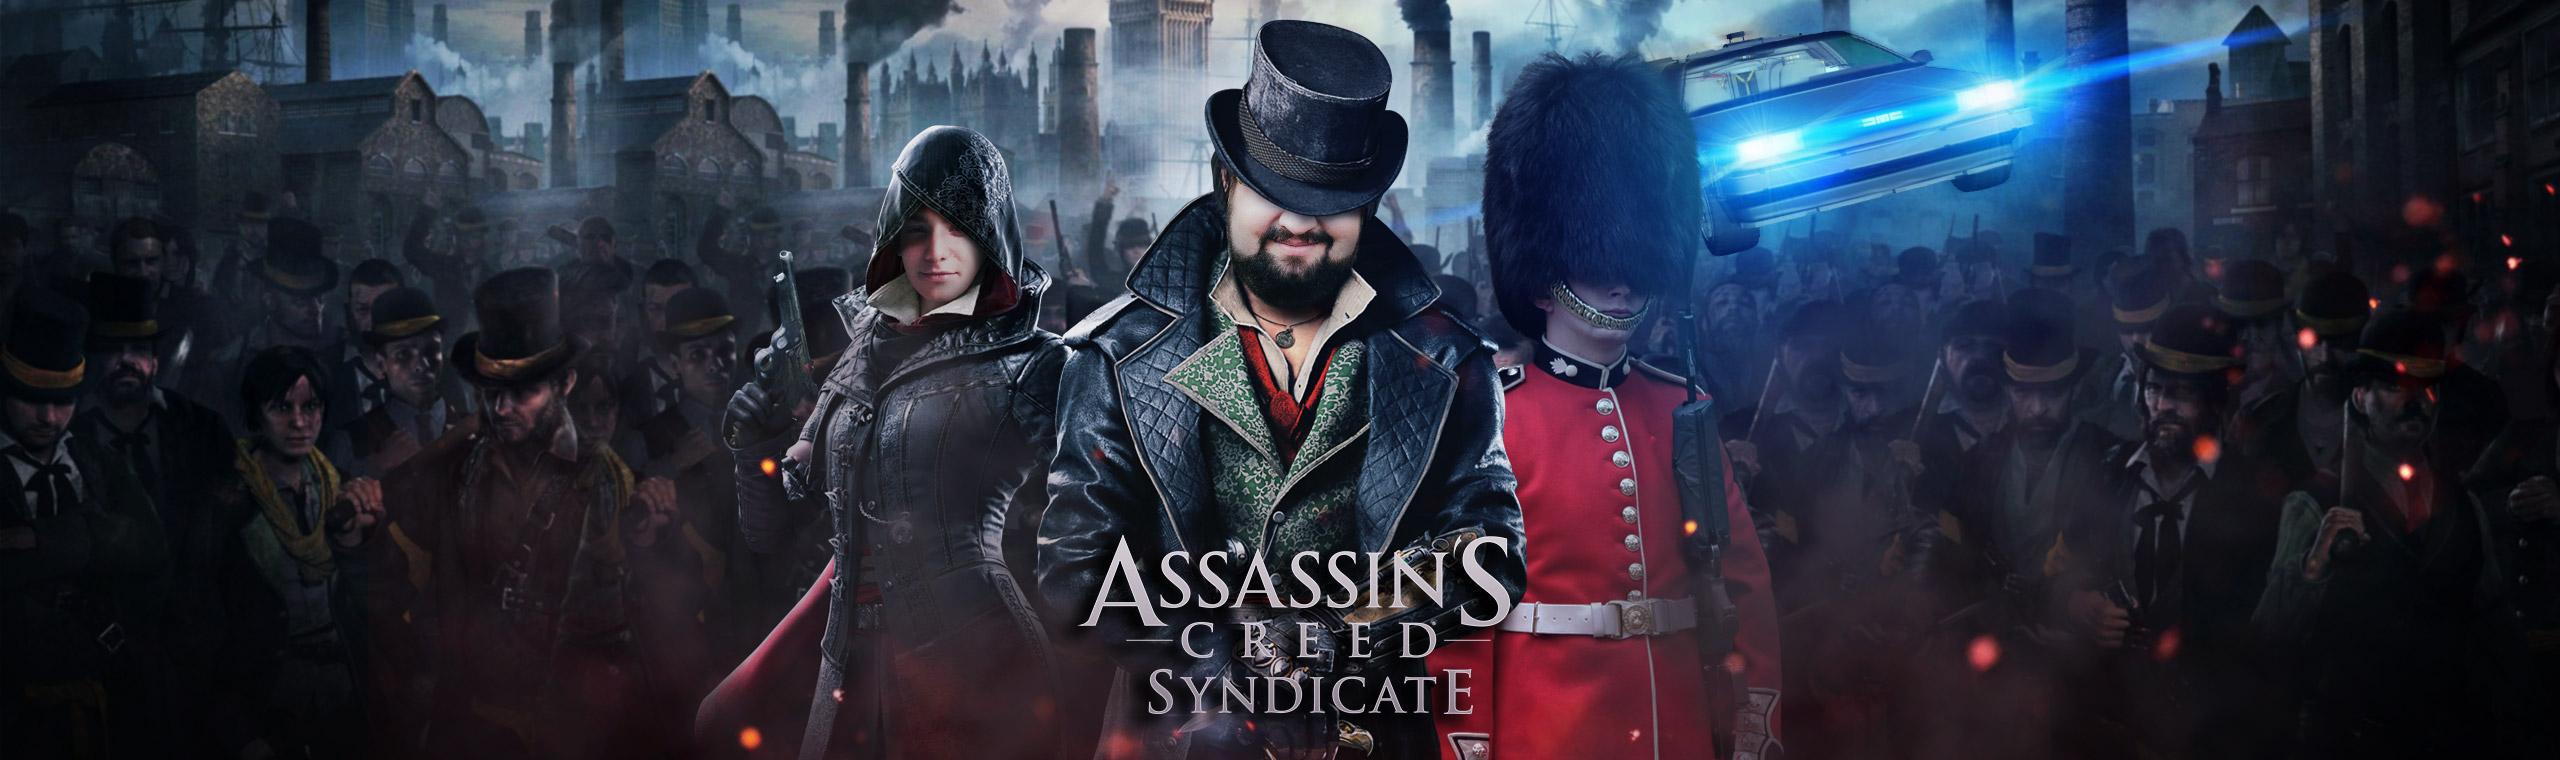 Assassin's Creed: Syndicate - The zoeira is on the table